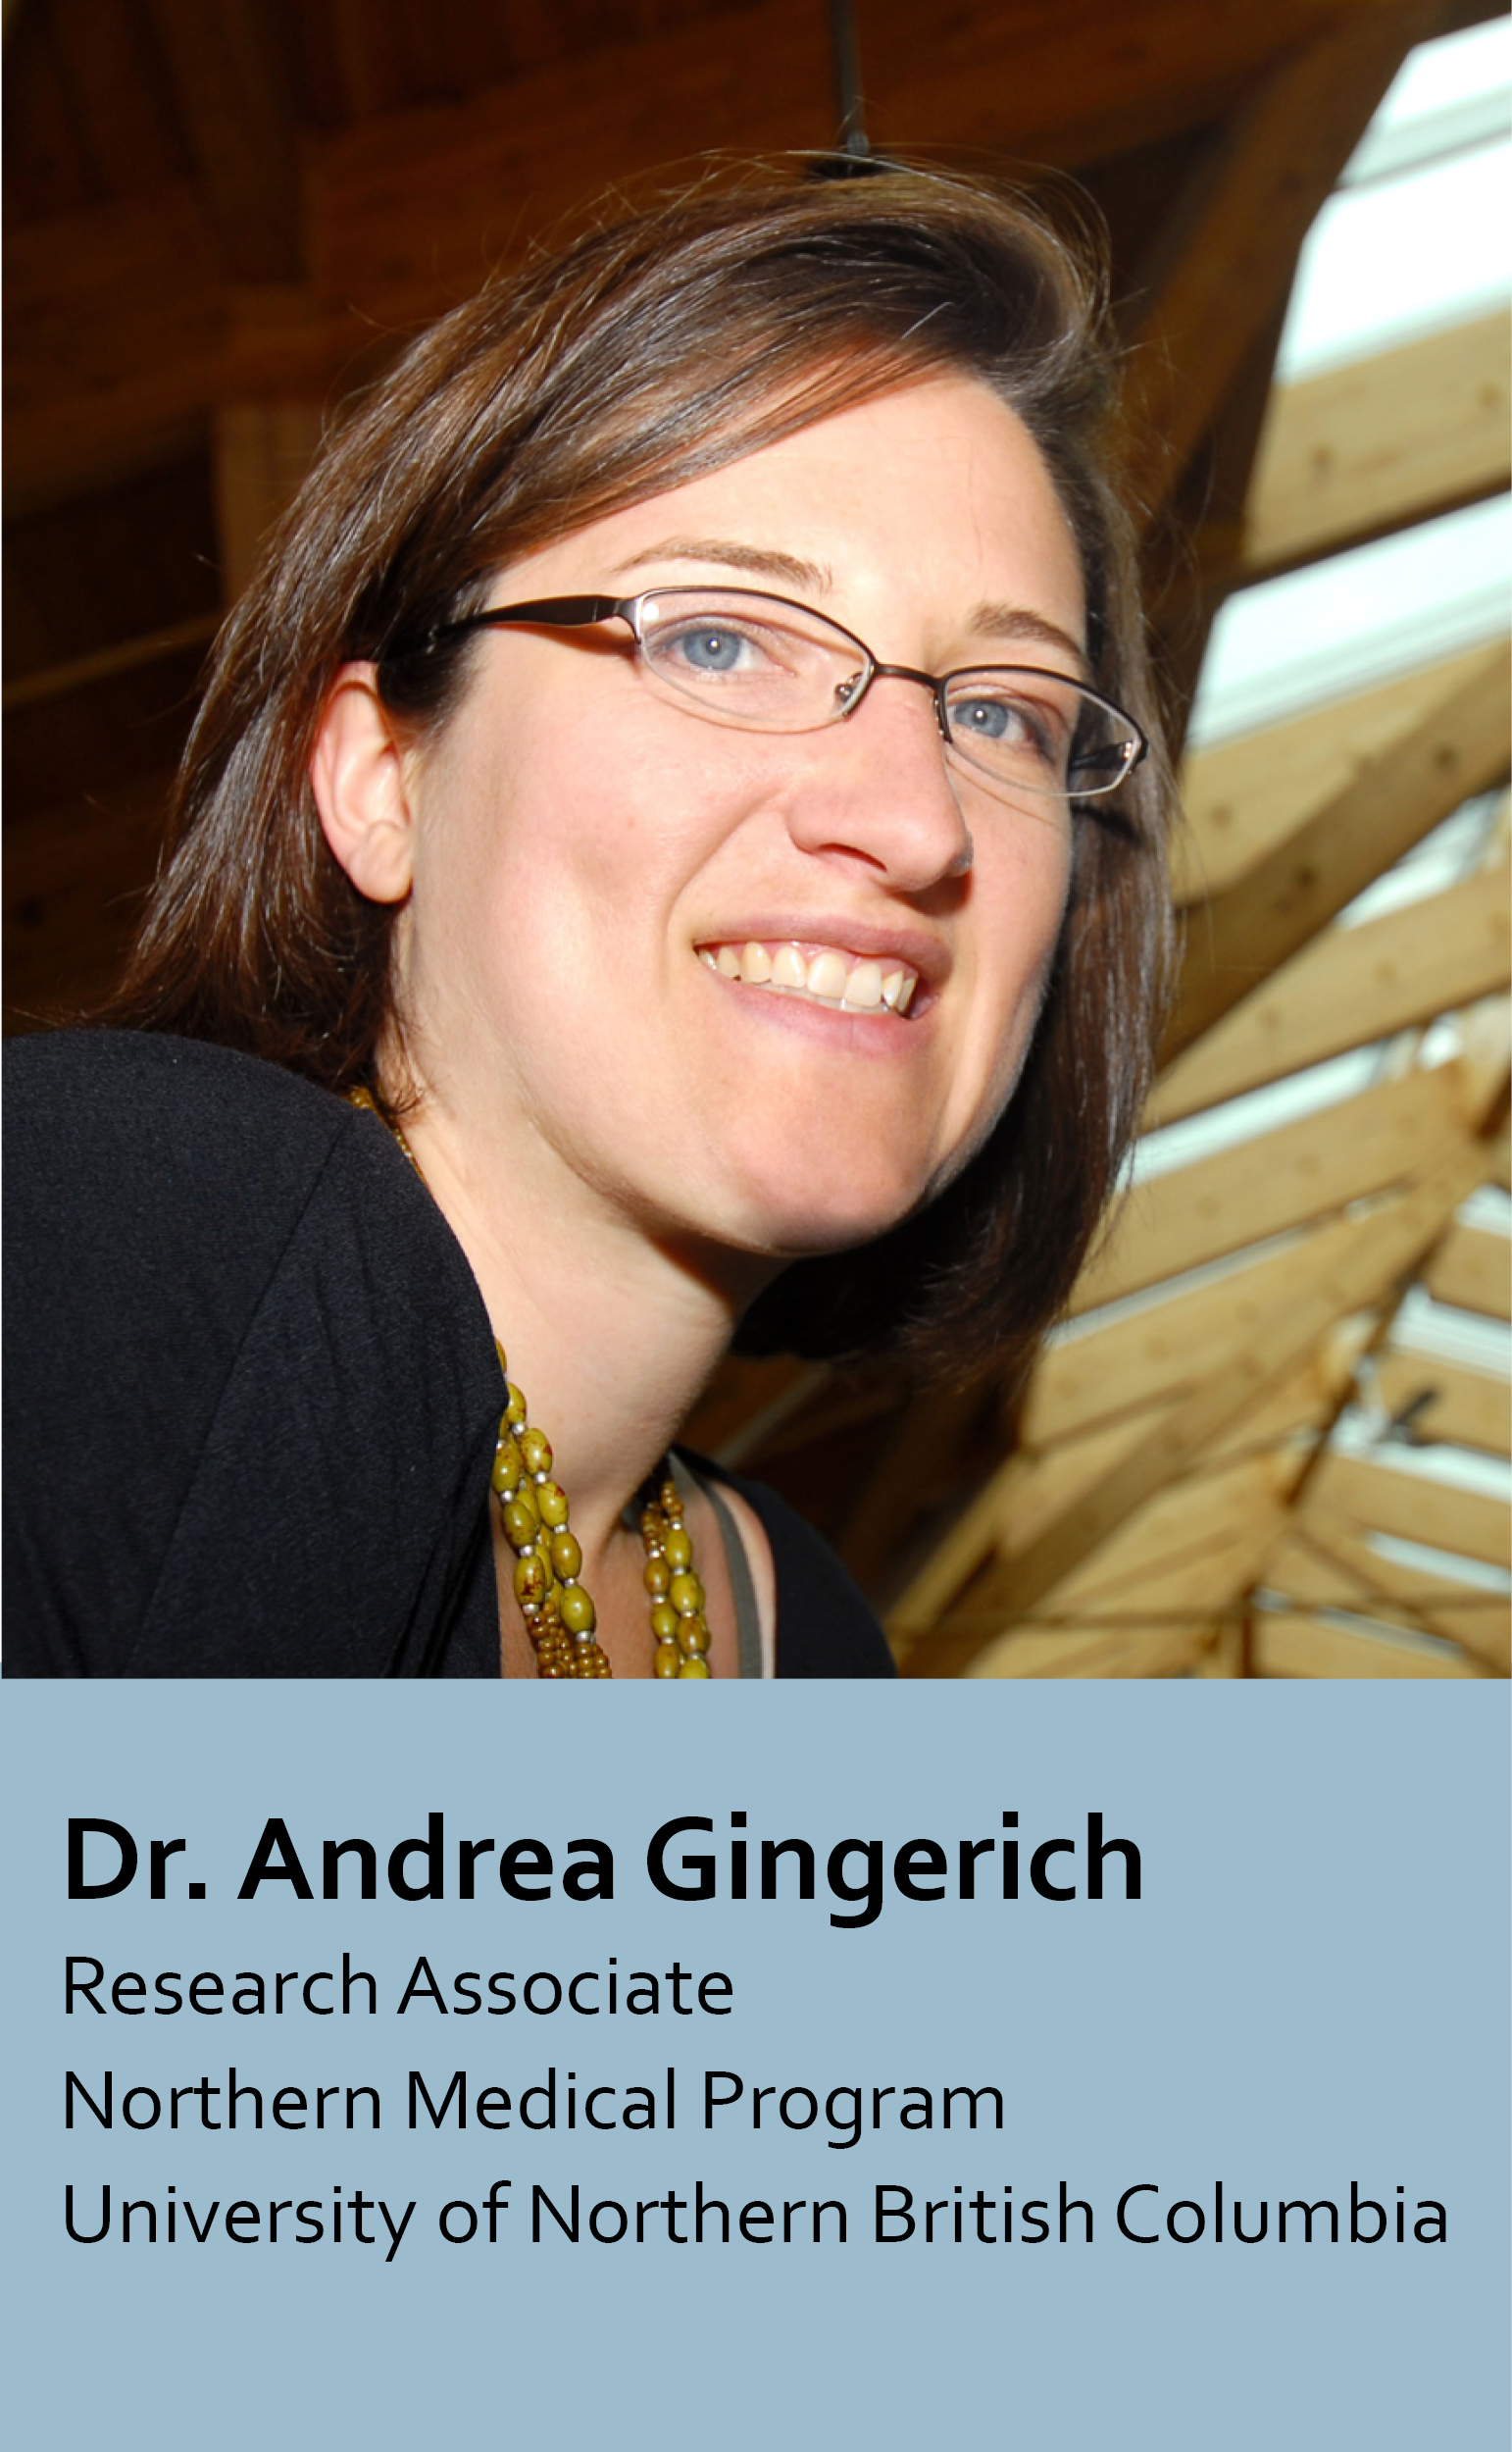 Dr. Andrea Gingerich